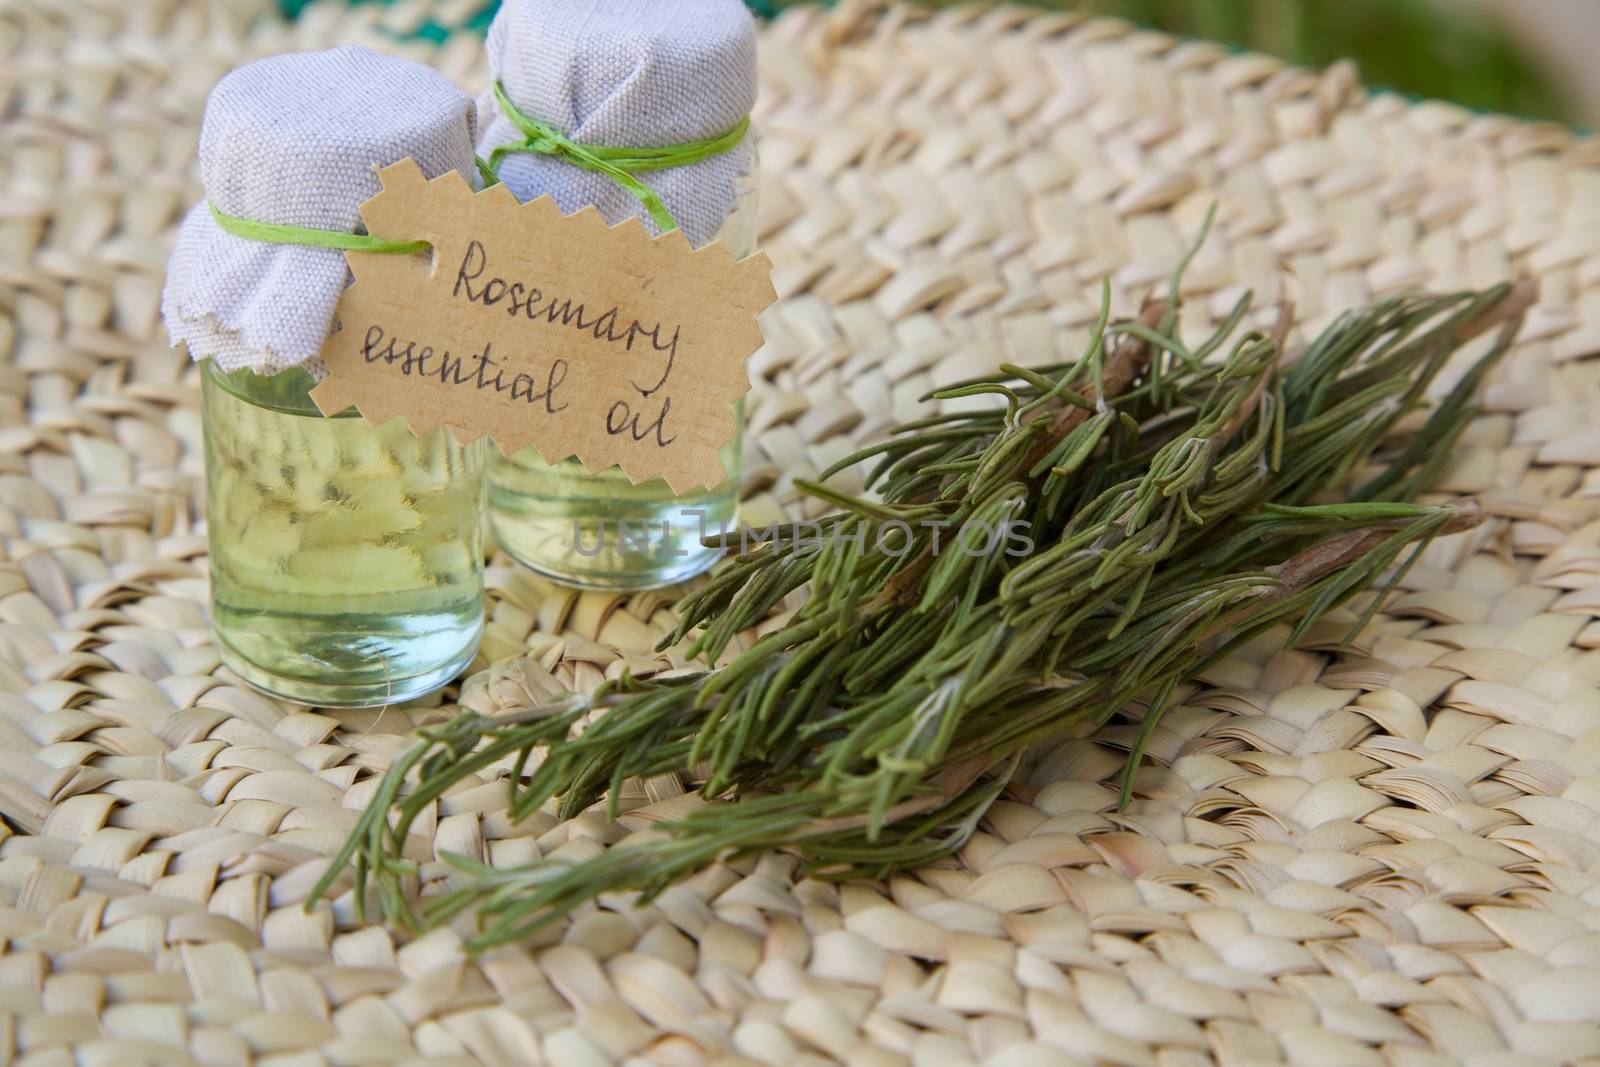 Rosemary essential oil and rosemary branchlets in the background